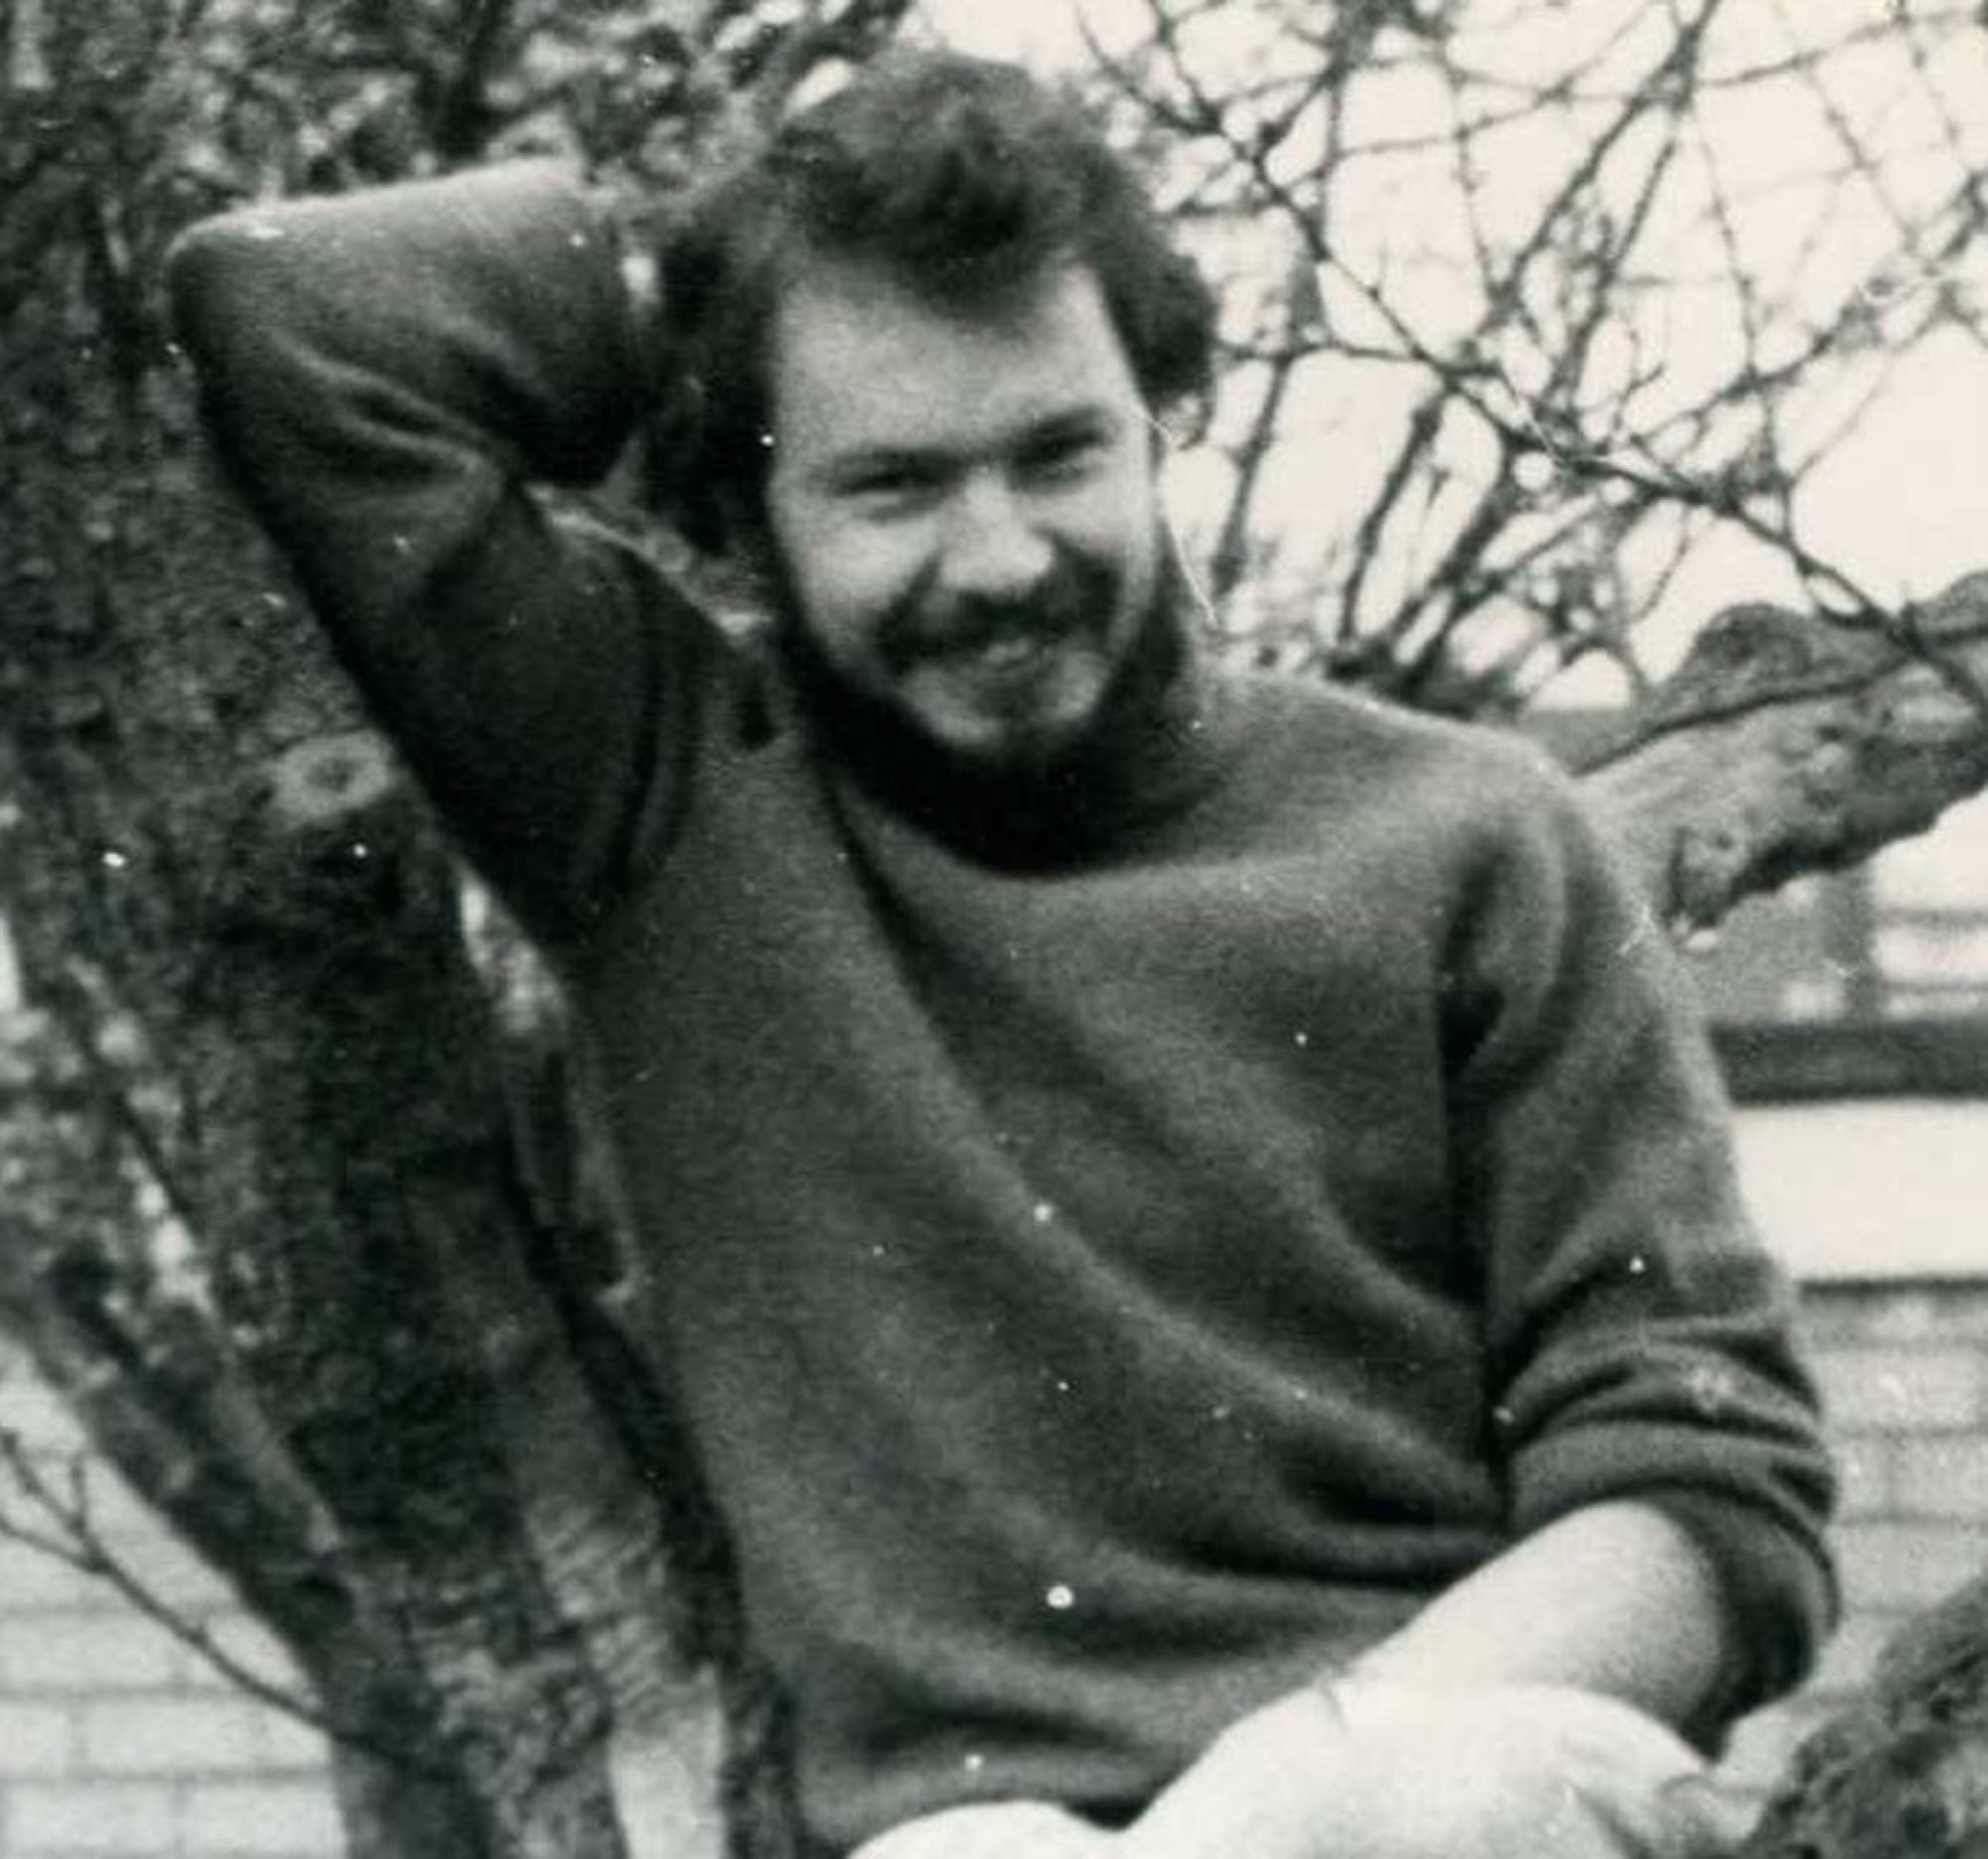 Daniel Morgan, a private investigator who was killed with an axe in the car park of the Golden Lion pub in Sydenham, southeast London, on 10 March 1987